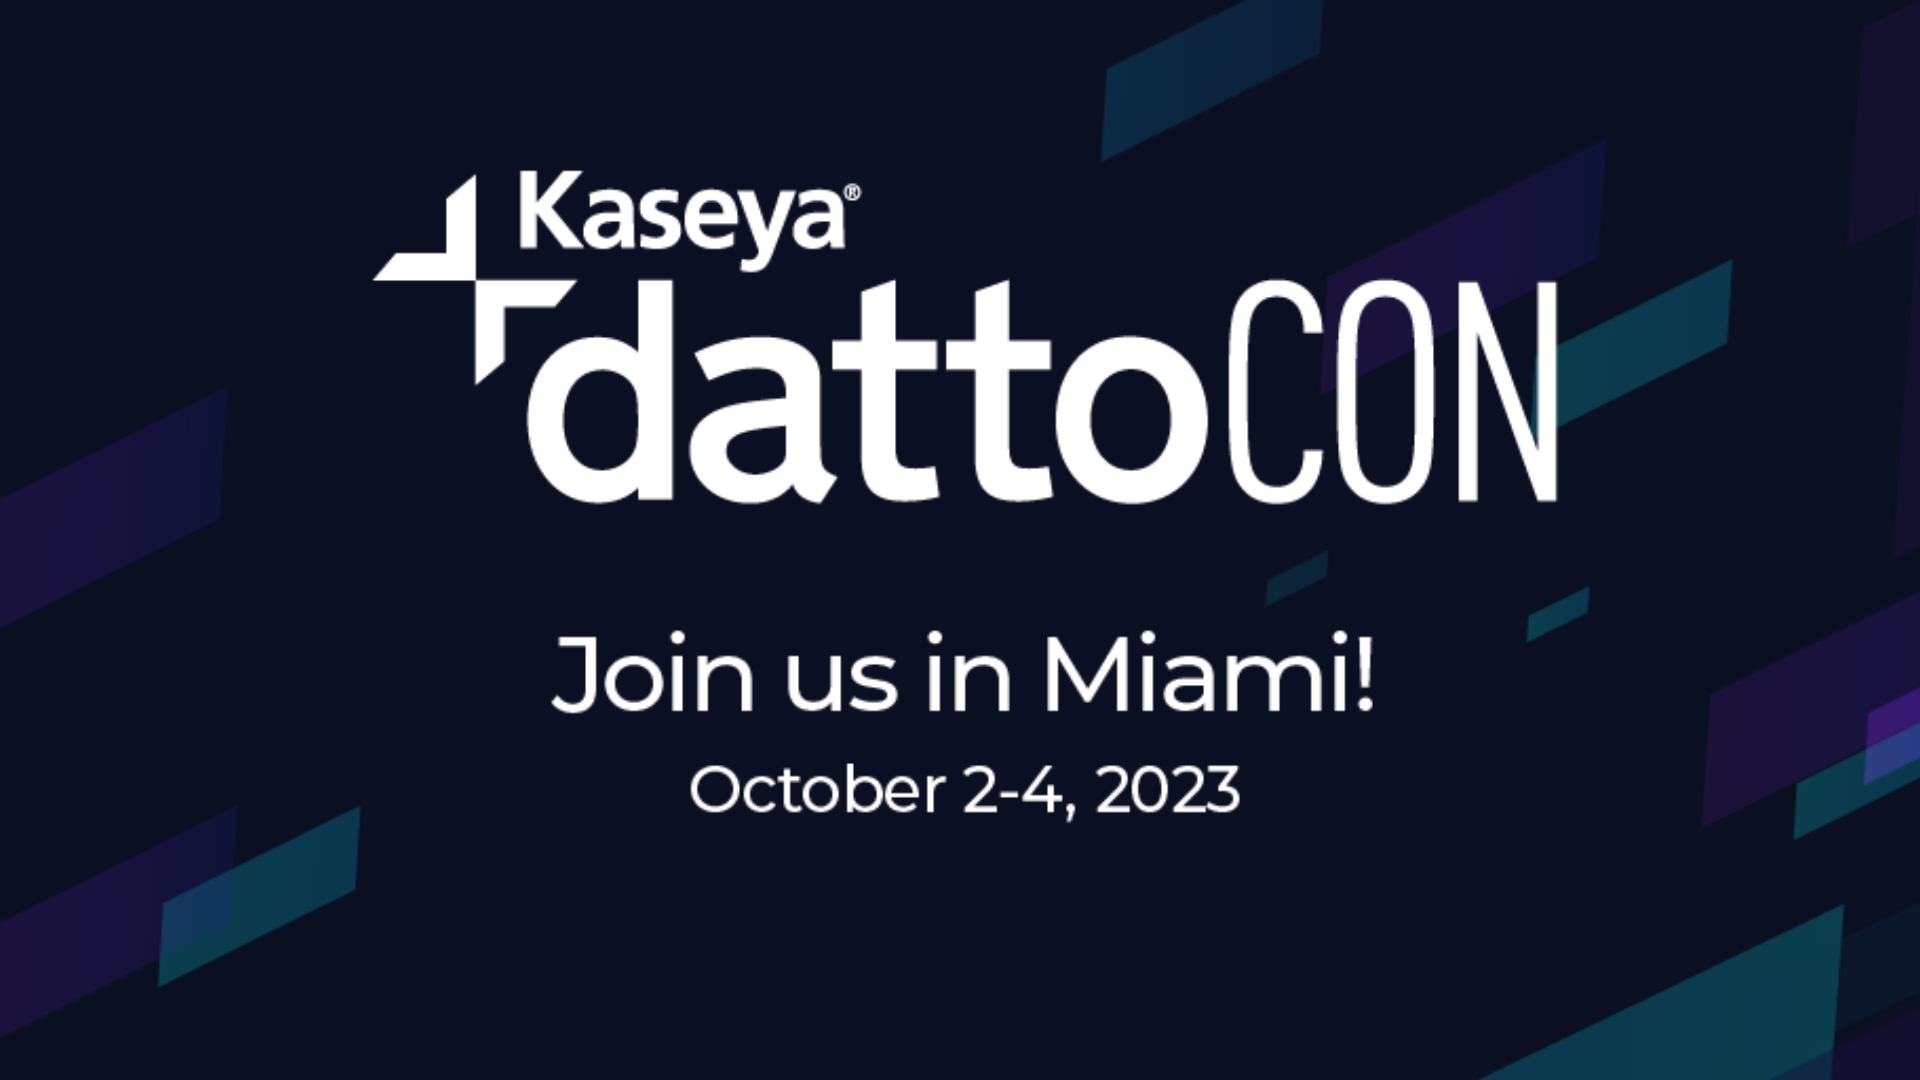 Join Edwards at Kaseya DattoCon Miami! Edwards Performance Solutions